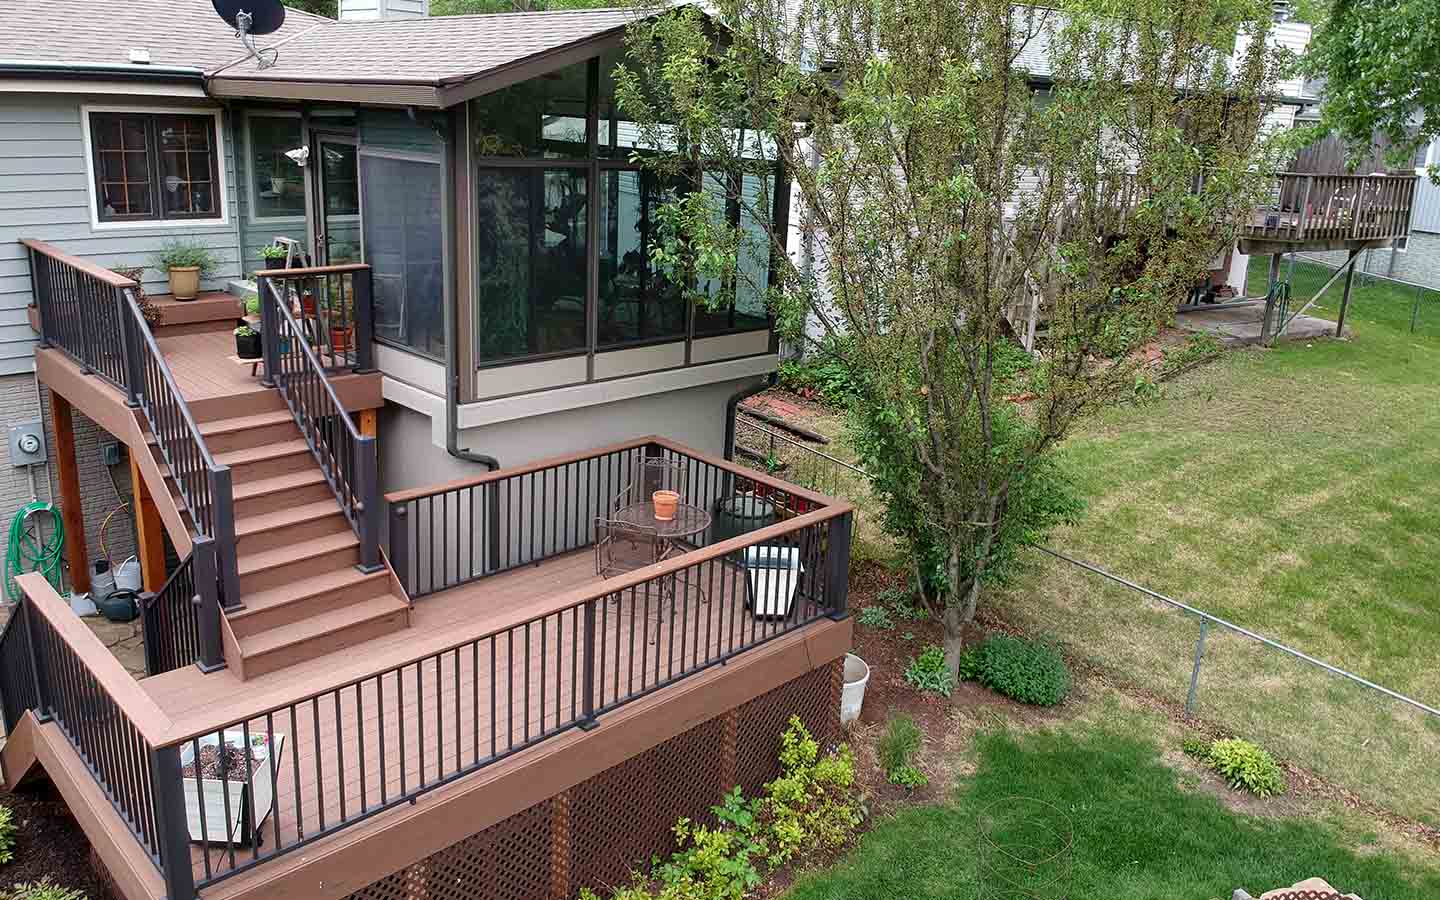 let’s go through the pros, cons and difference between deck and patio